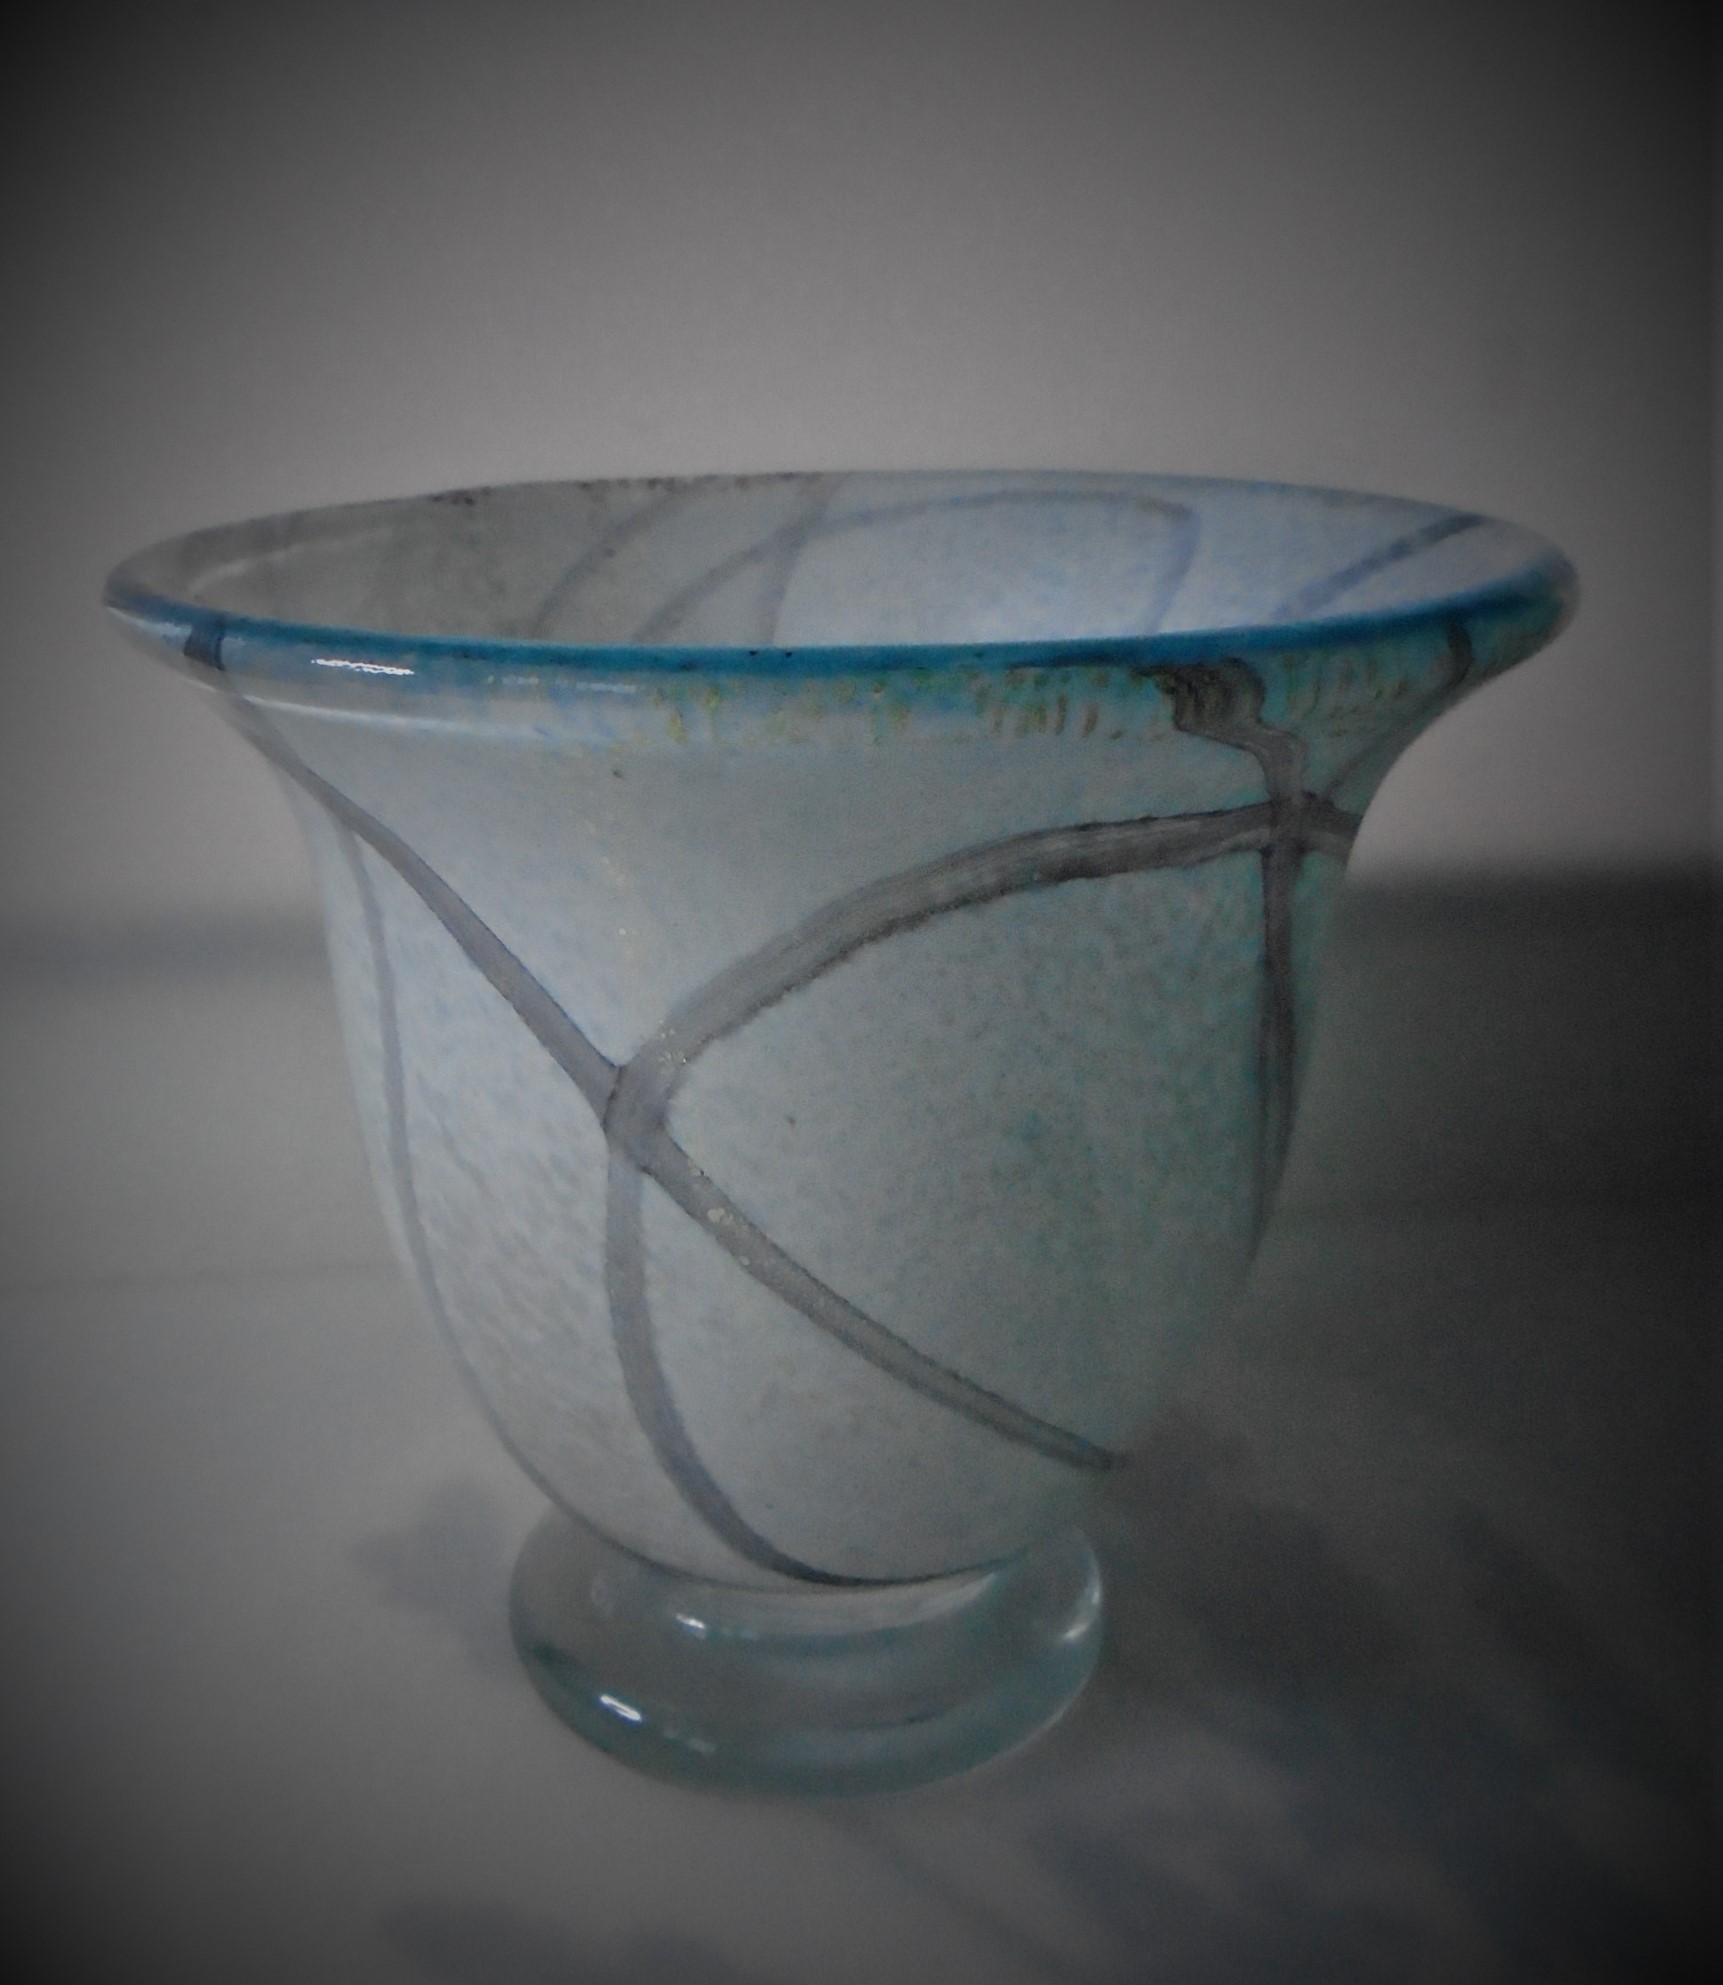 Less seen example of a VINTAGE PHOENICIAN GLASS FLARED RIM VASE